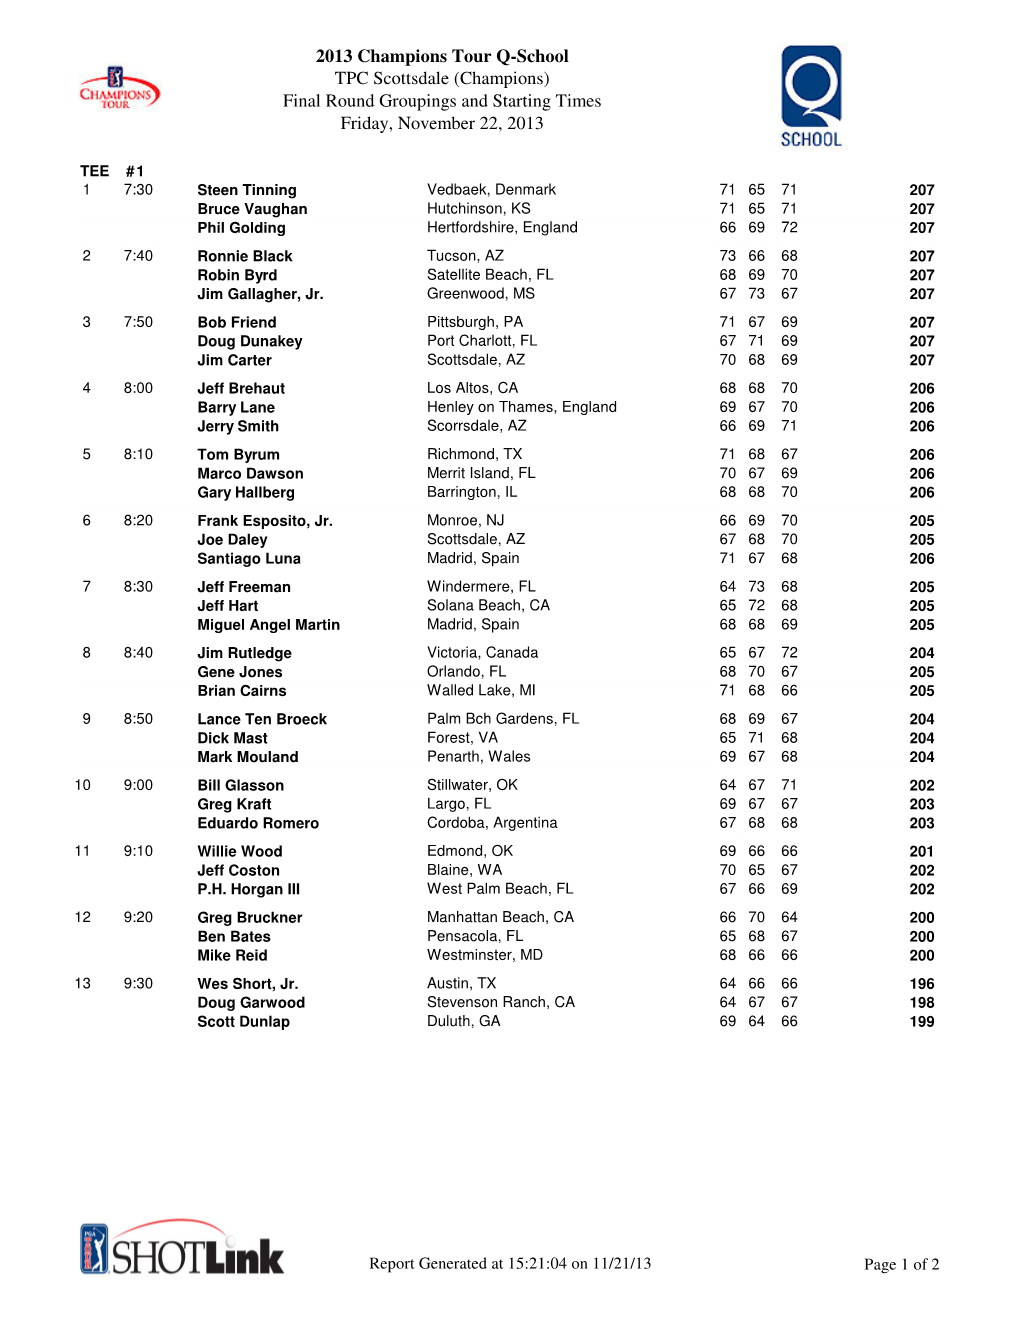 2013 Champions Tour Q-School TPC Scottsdale (Champions) Final Round Groupings and Starting Times Friday, November 22, 2013